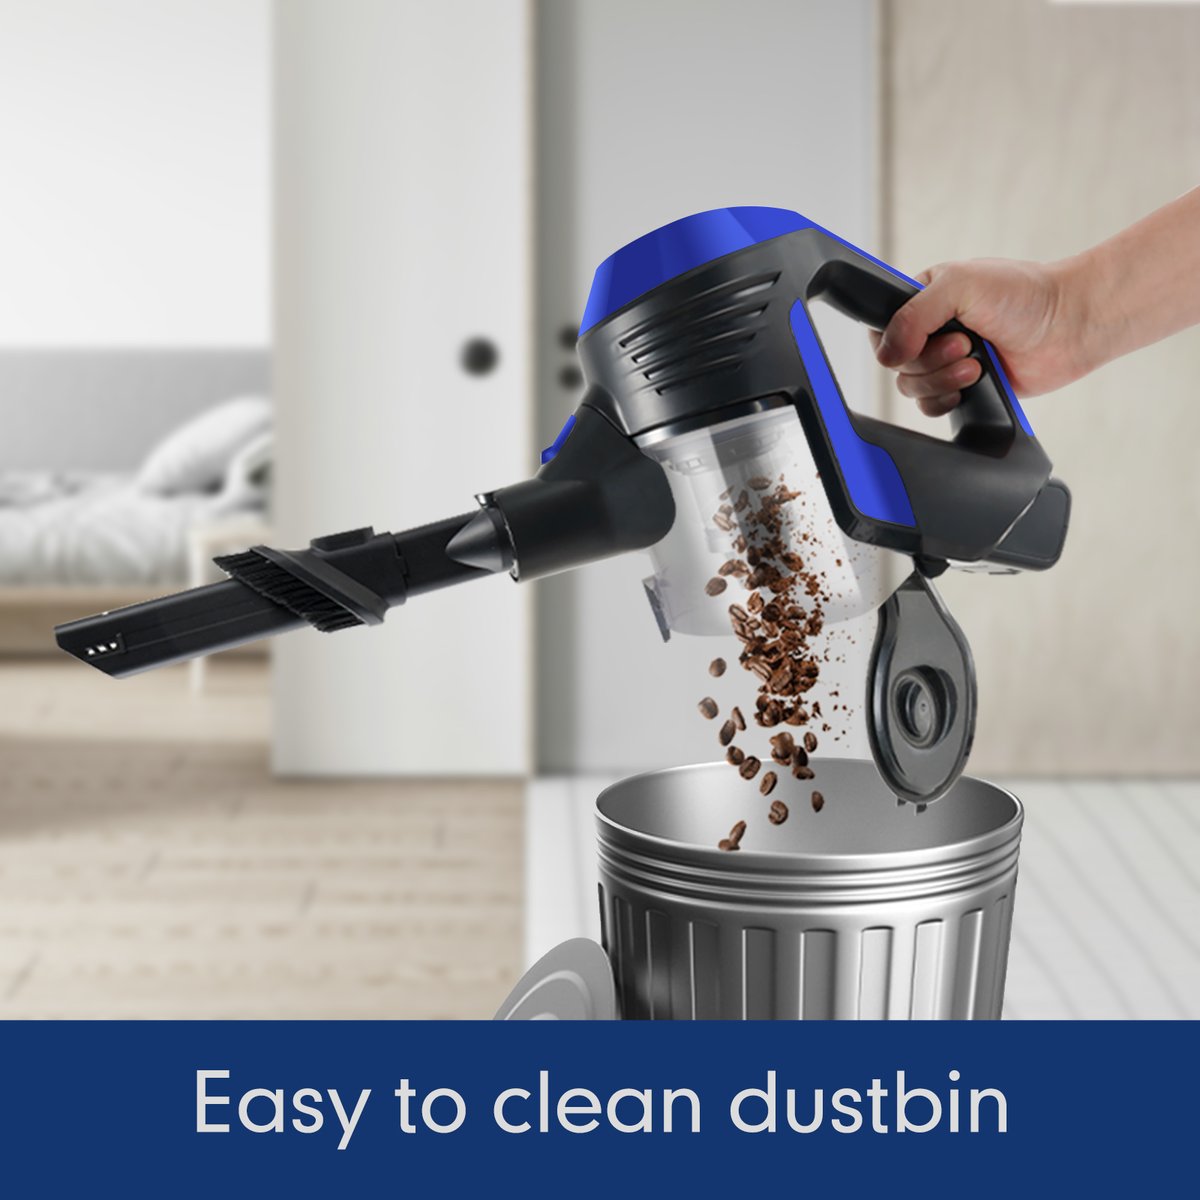 Introducing the Moosoo XC1 Cordless Vacuum Cleaner: Say Goodbye to Hassle and Hello to Easy Cleaning! 🧹💨
#moosoo #moosoo_us #CordlessVacuum
#VacuumCleaner #CleaningSolutions #HomeCleaning #EasyCleaning #ConvenientCleaning #DustFree
#EfficientCleaning